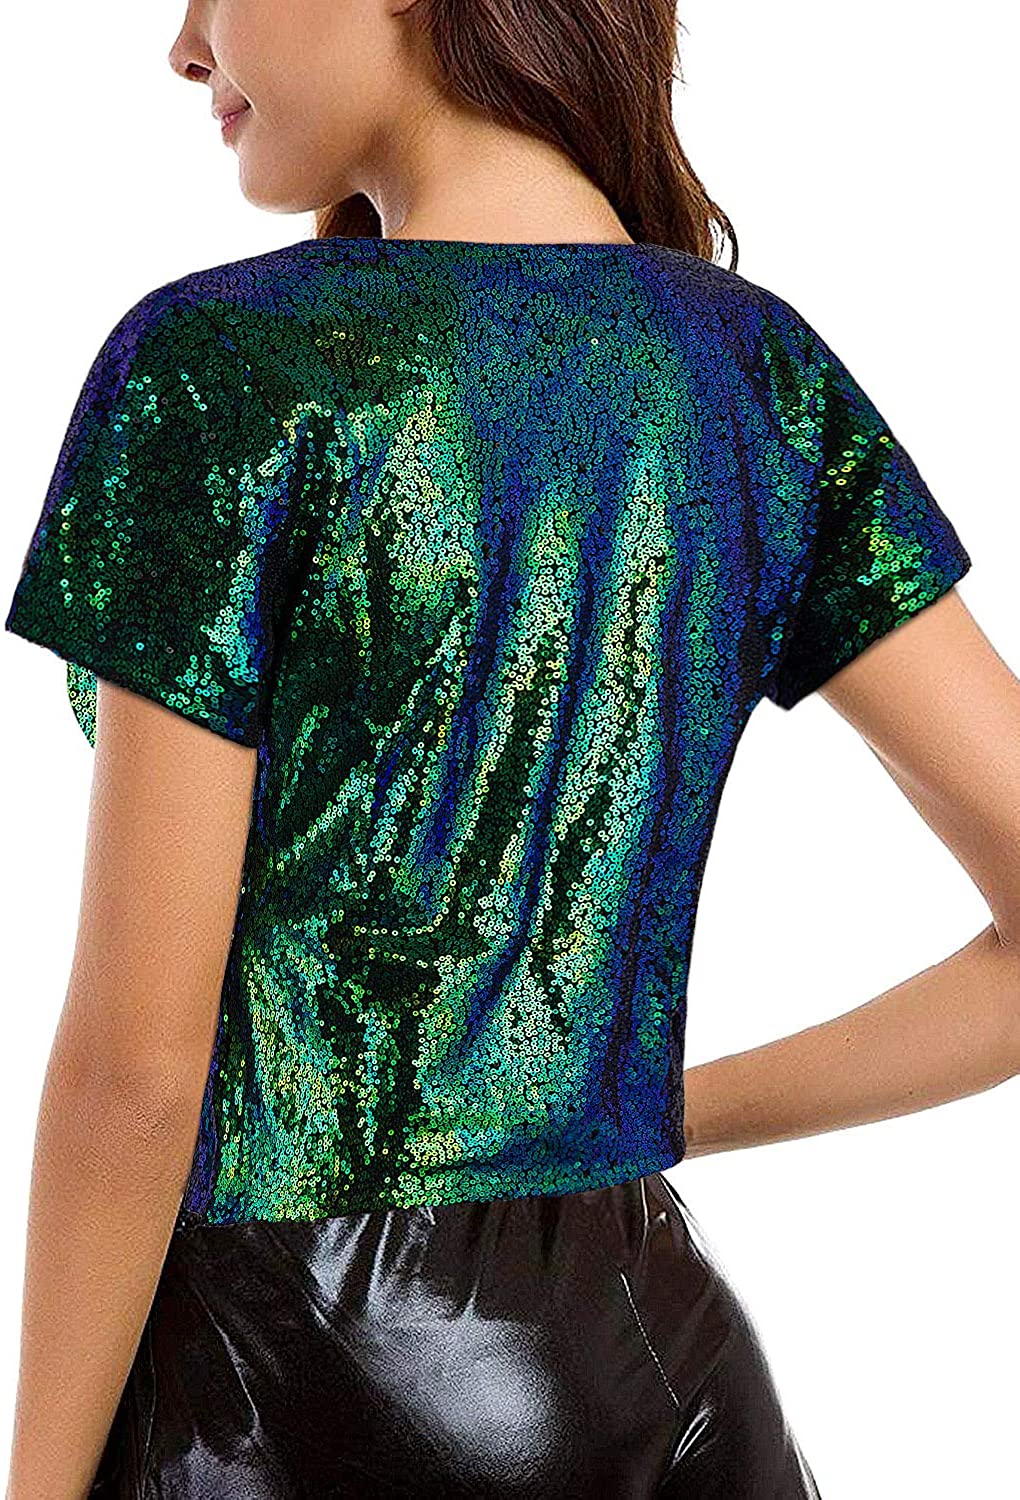 Vijiv Women's Sequin Cocktail Party Top Loose Sleeves, Green, Size XX ...